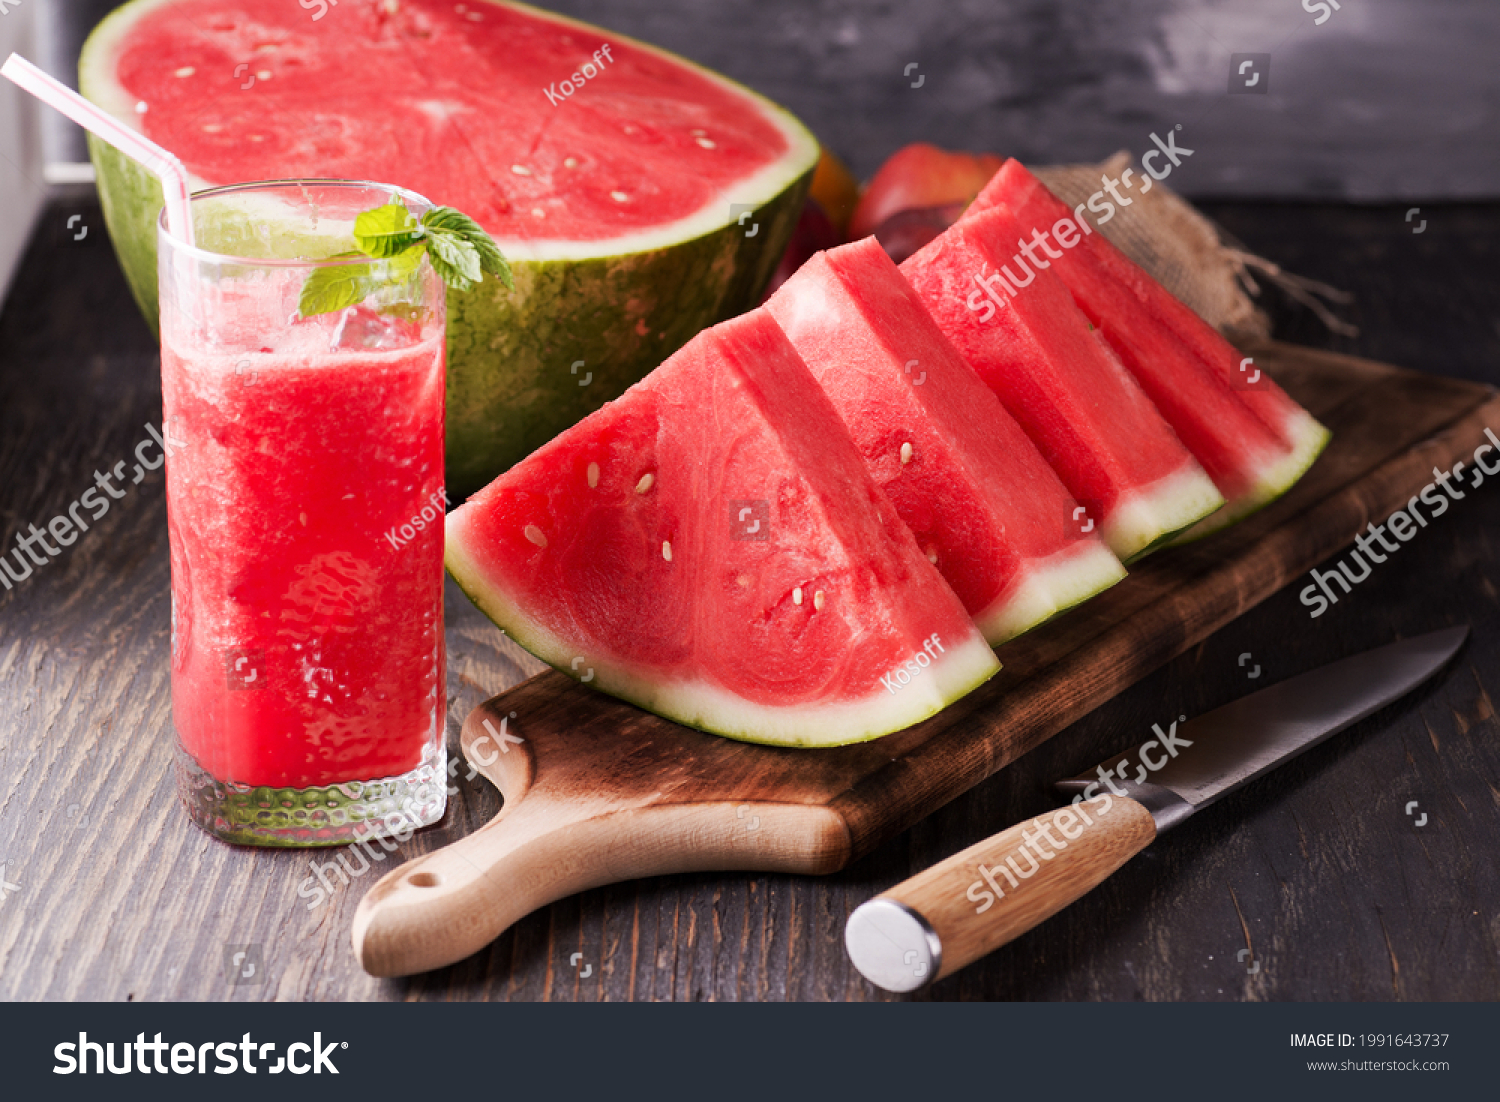 Fresh watermelon juice with ice in a glass. Slices of watermelon on the table.Fresh watermelon juice with ice in a glass. Slices of watermelon on the table. #1991643737